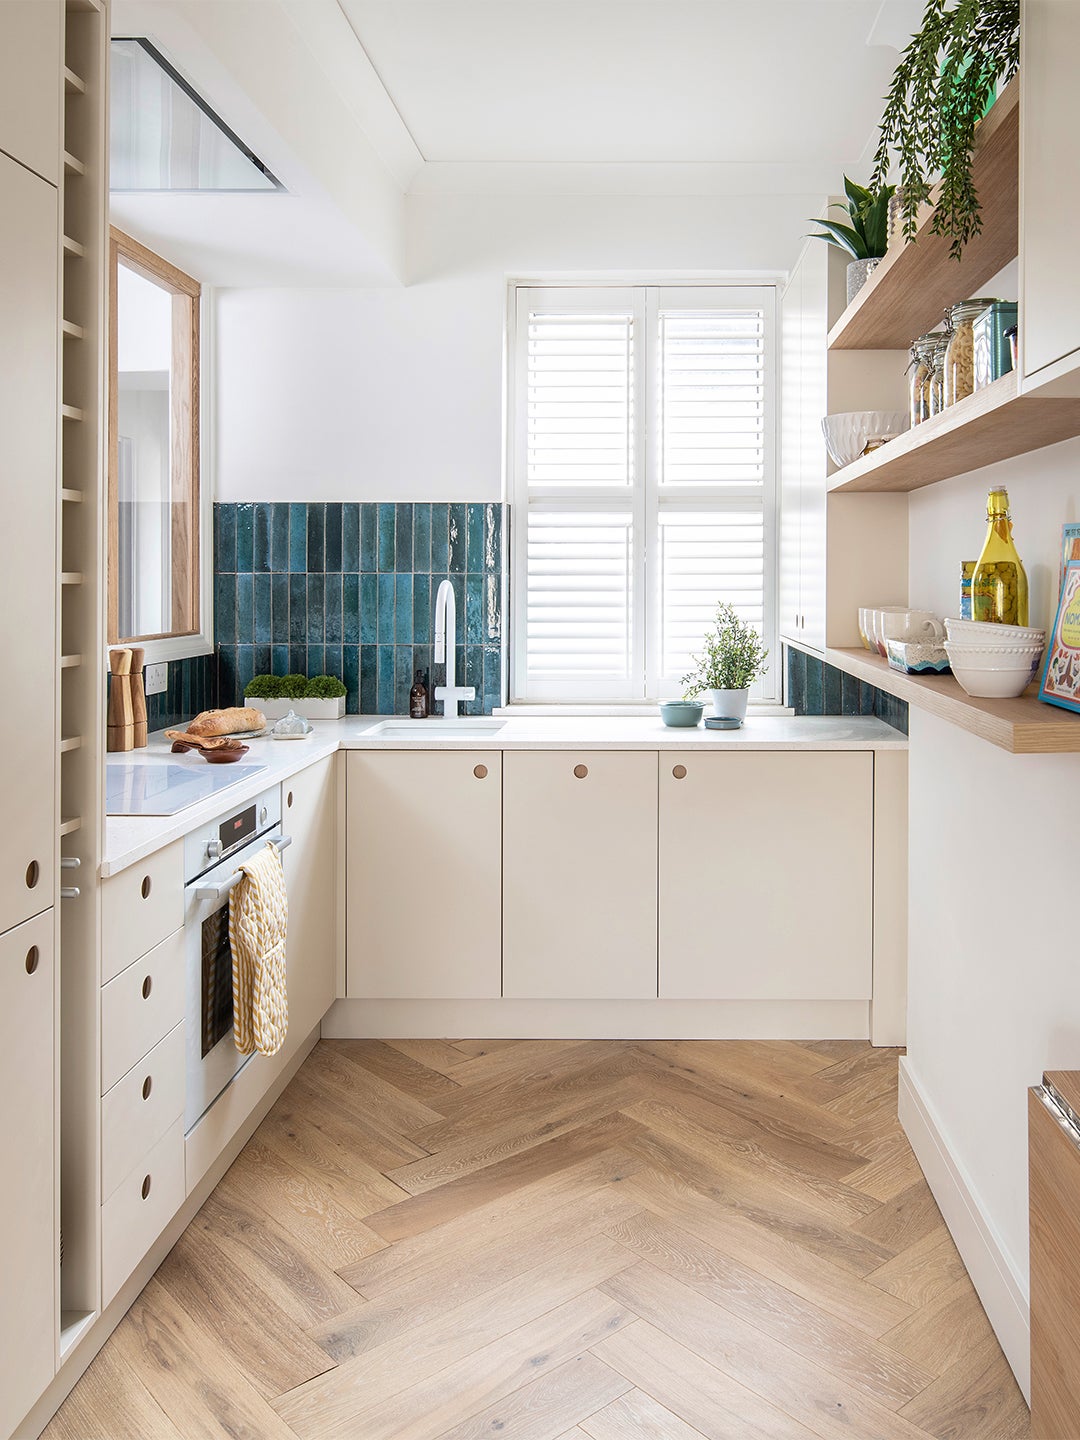 The 7 White Wall Paints That Go Best With White Cabinets